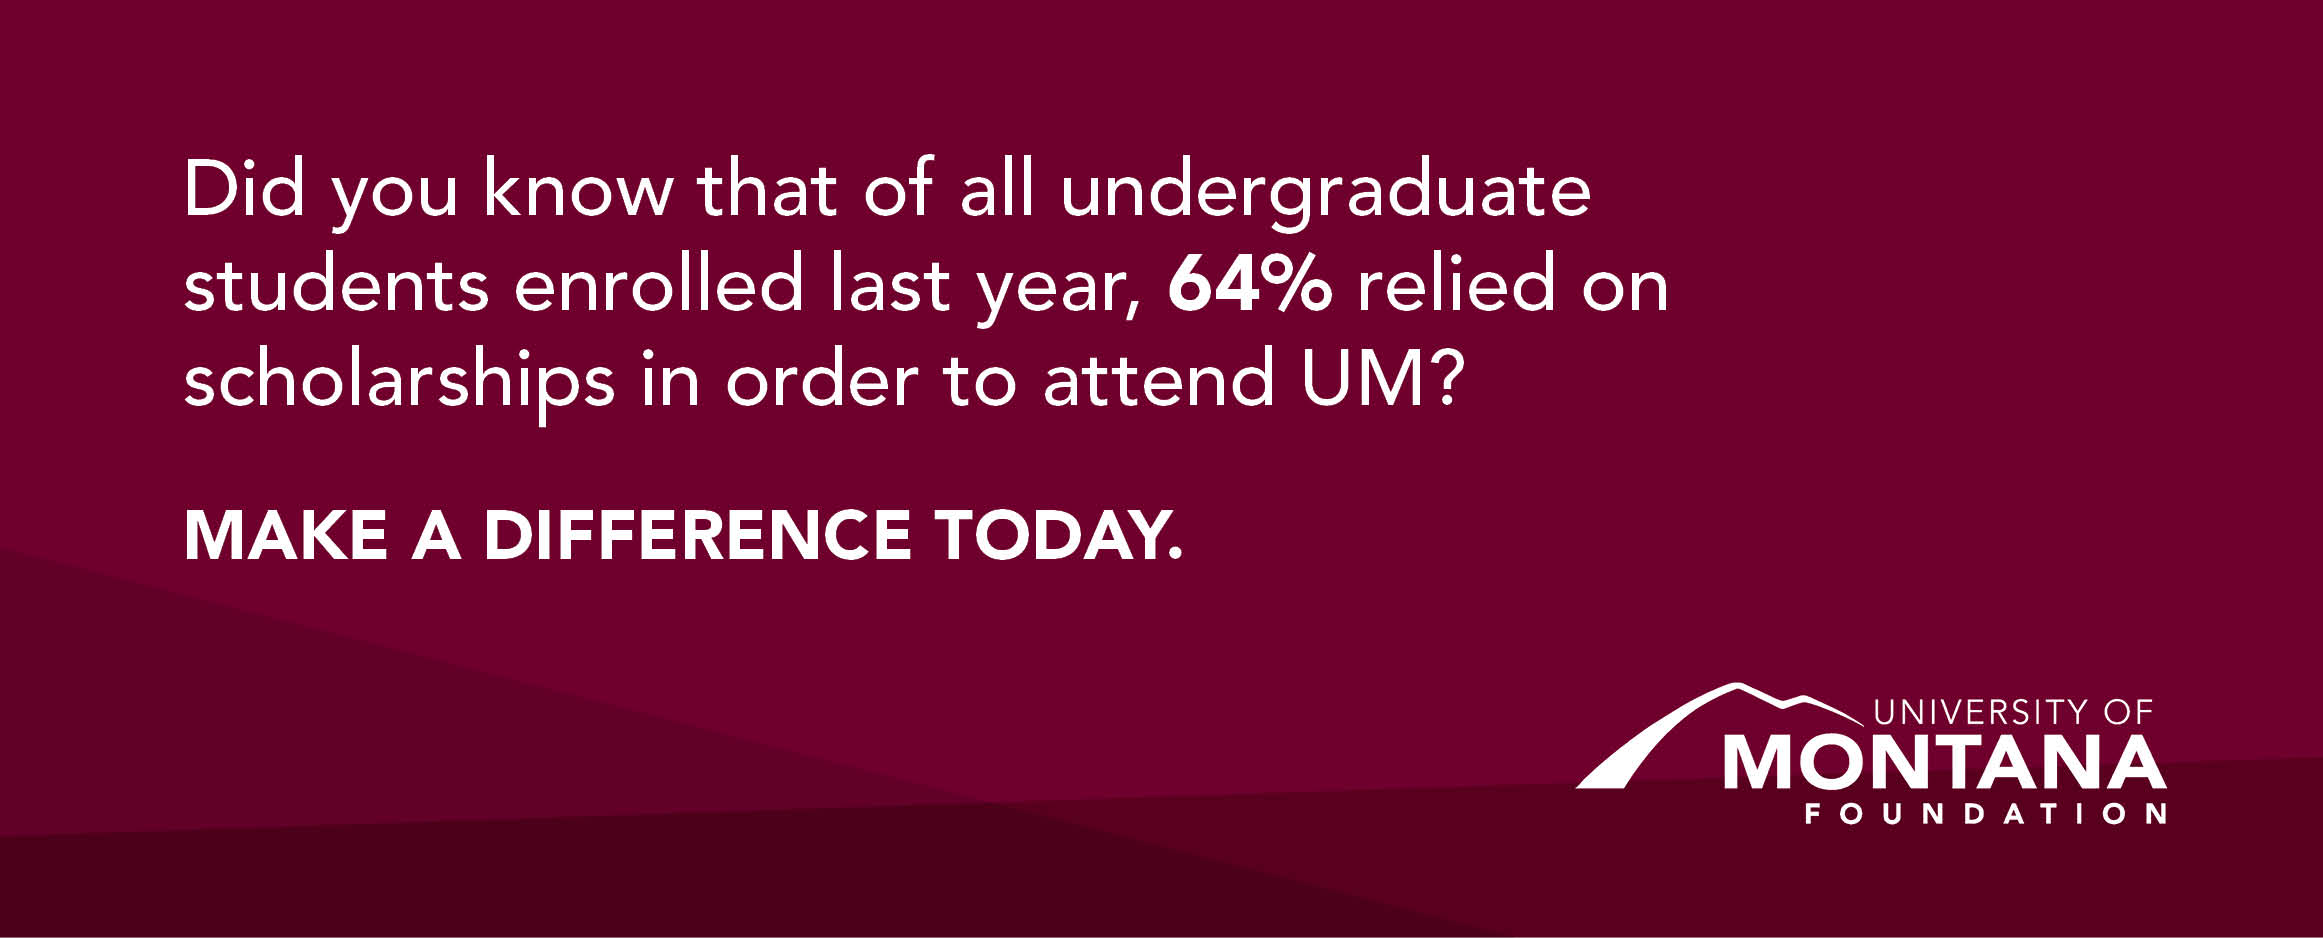 Of all undergraduate students enrolled last year, 64% relied on scholarships in order to attend UM. Make a difference today.